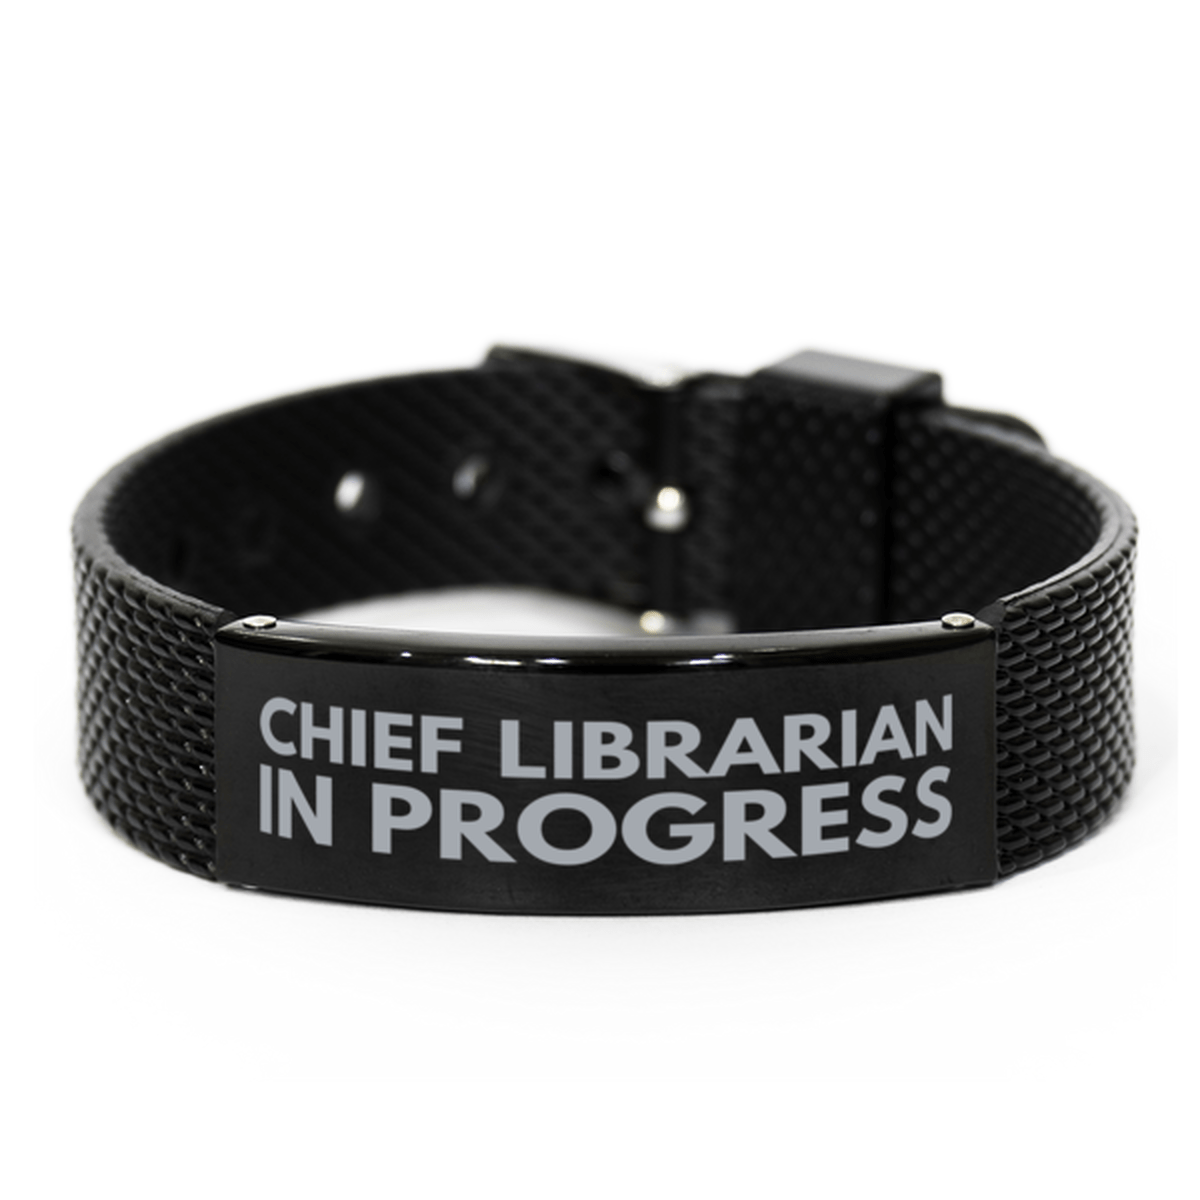 Inspirational Chief Librarian Black Shark Mesh Bracelet, Chief Librarian In Progress, Best Graduation Gifts for Students